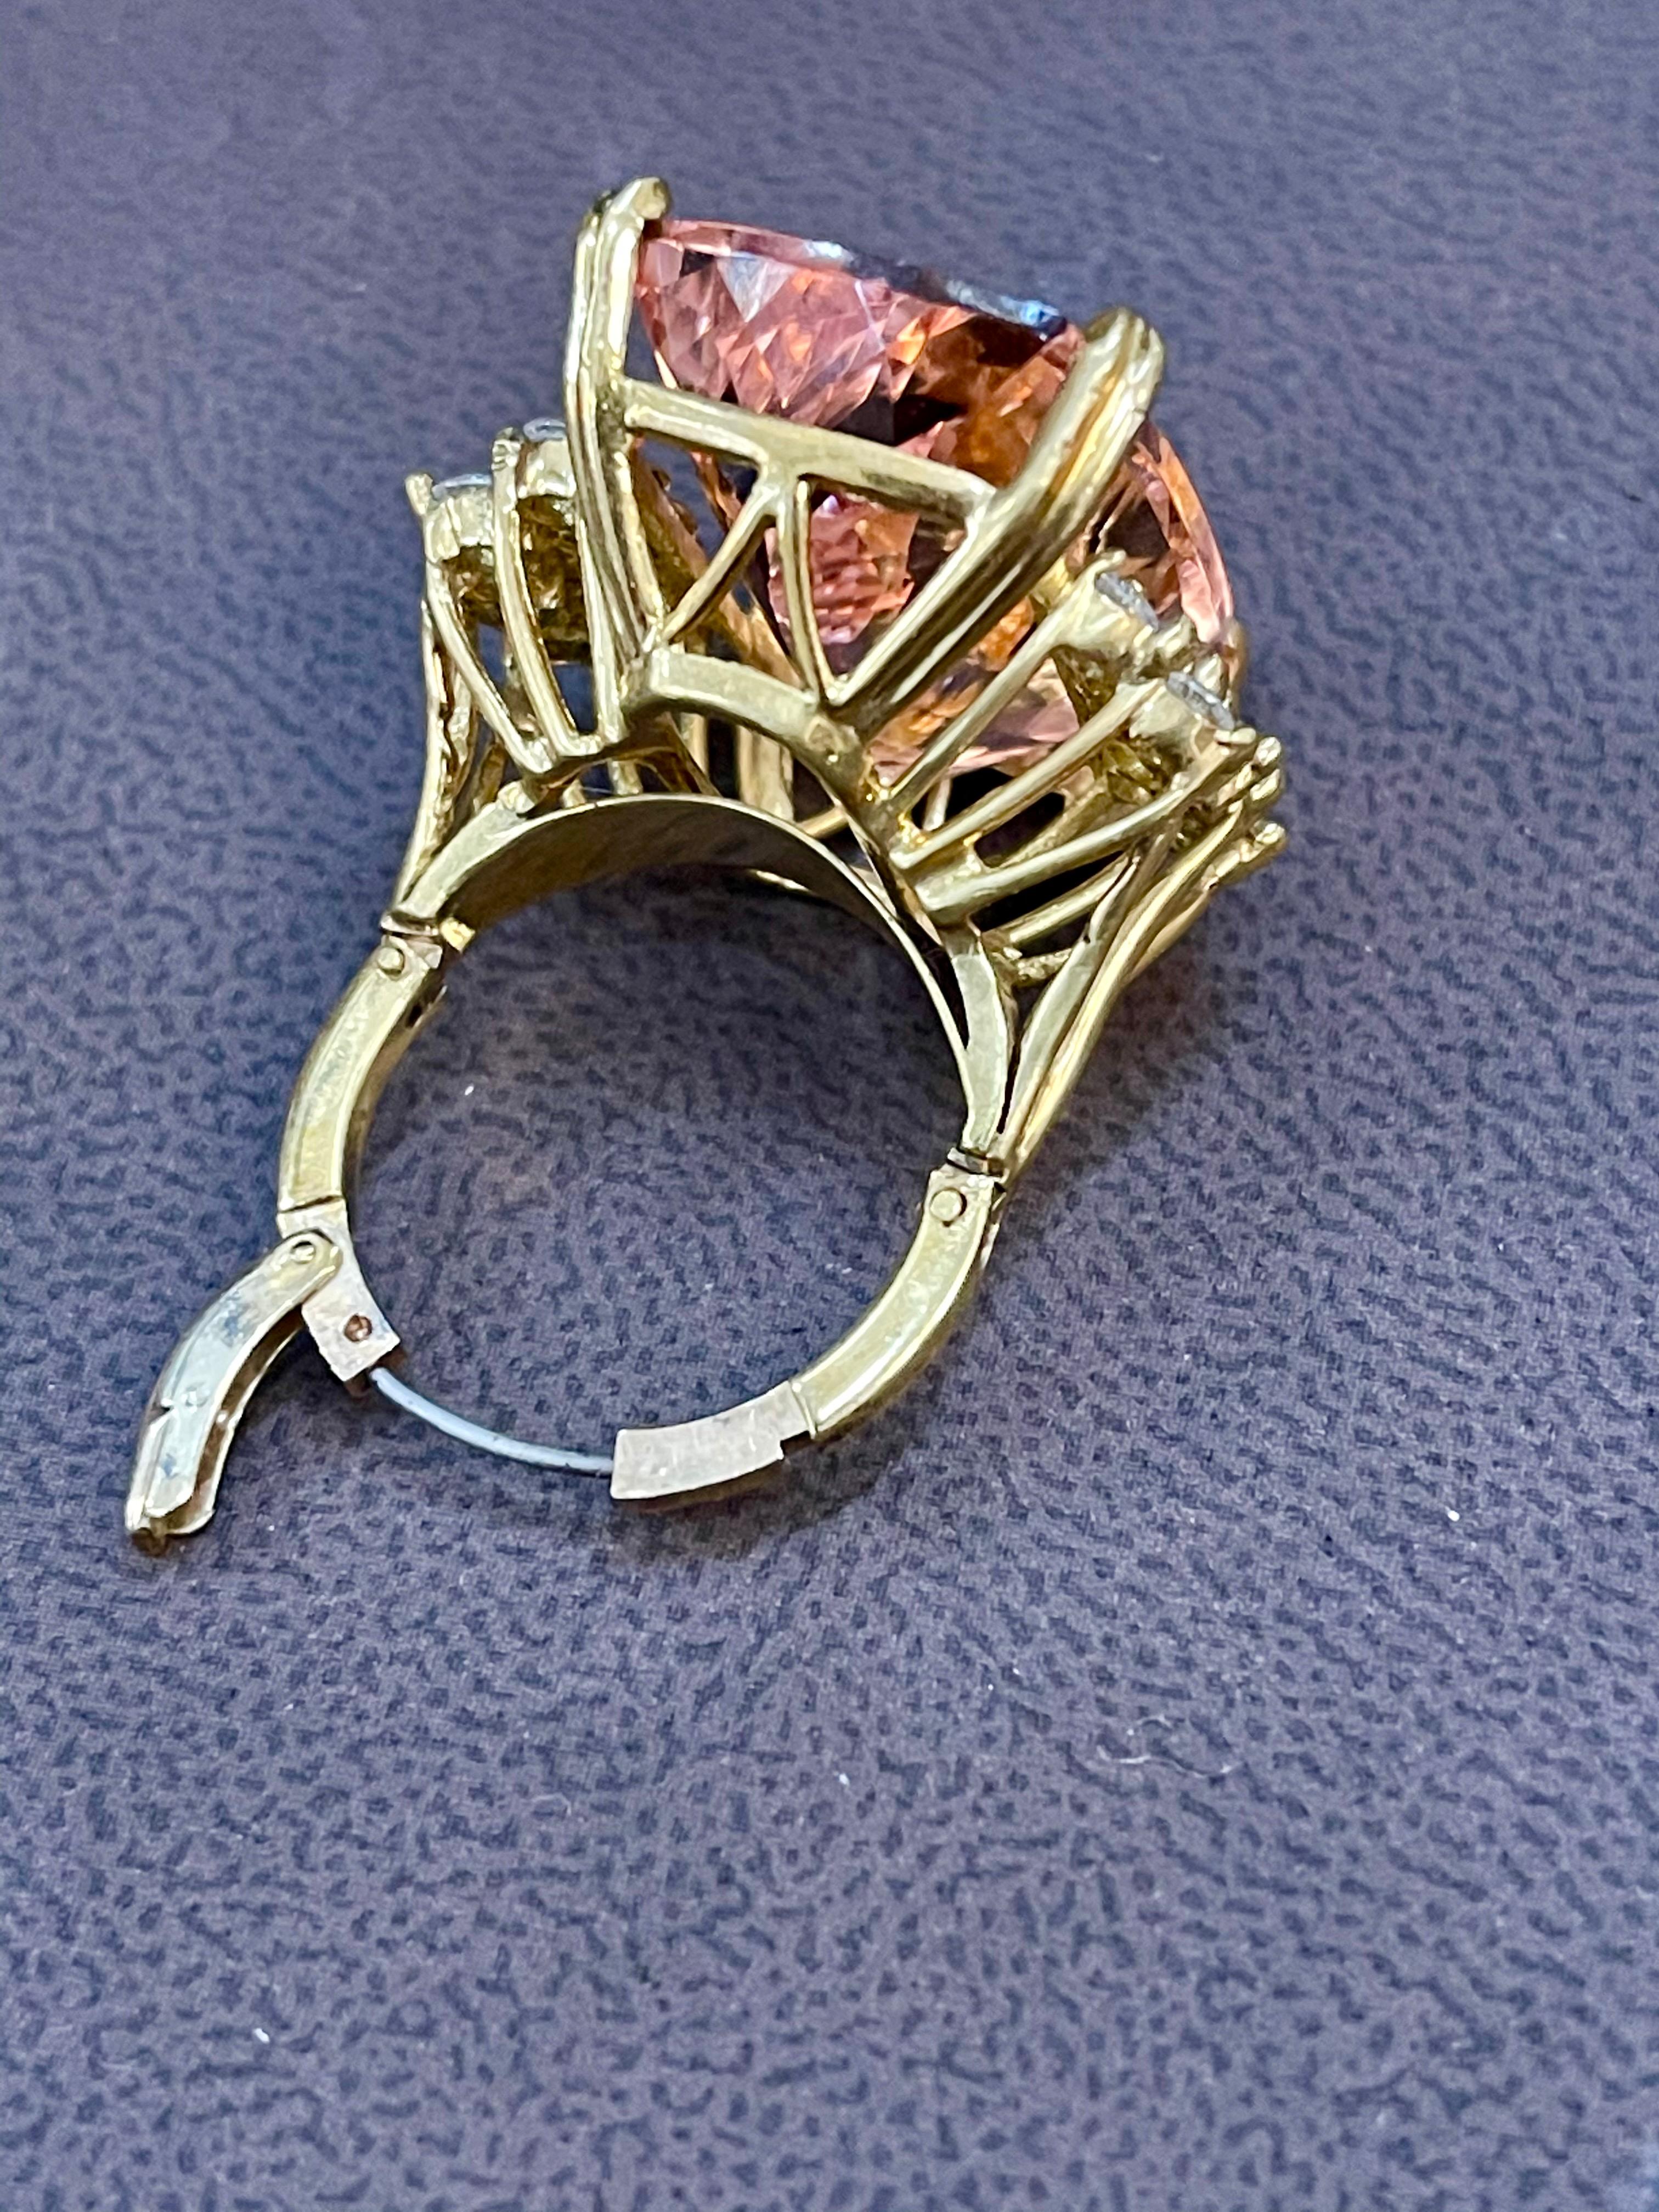 27 Carat Cushion Shape Morganite & Diamond Cocktail Ring 14 Karat Yellow Gold In Excellent Condition For Sale In New York, NY